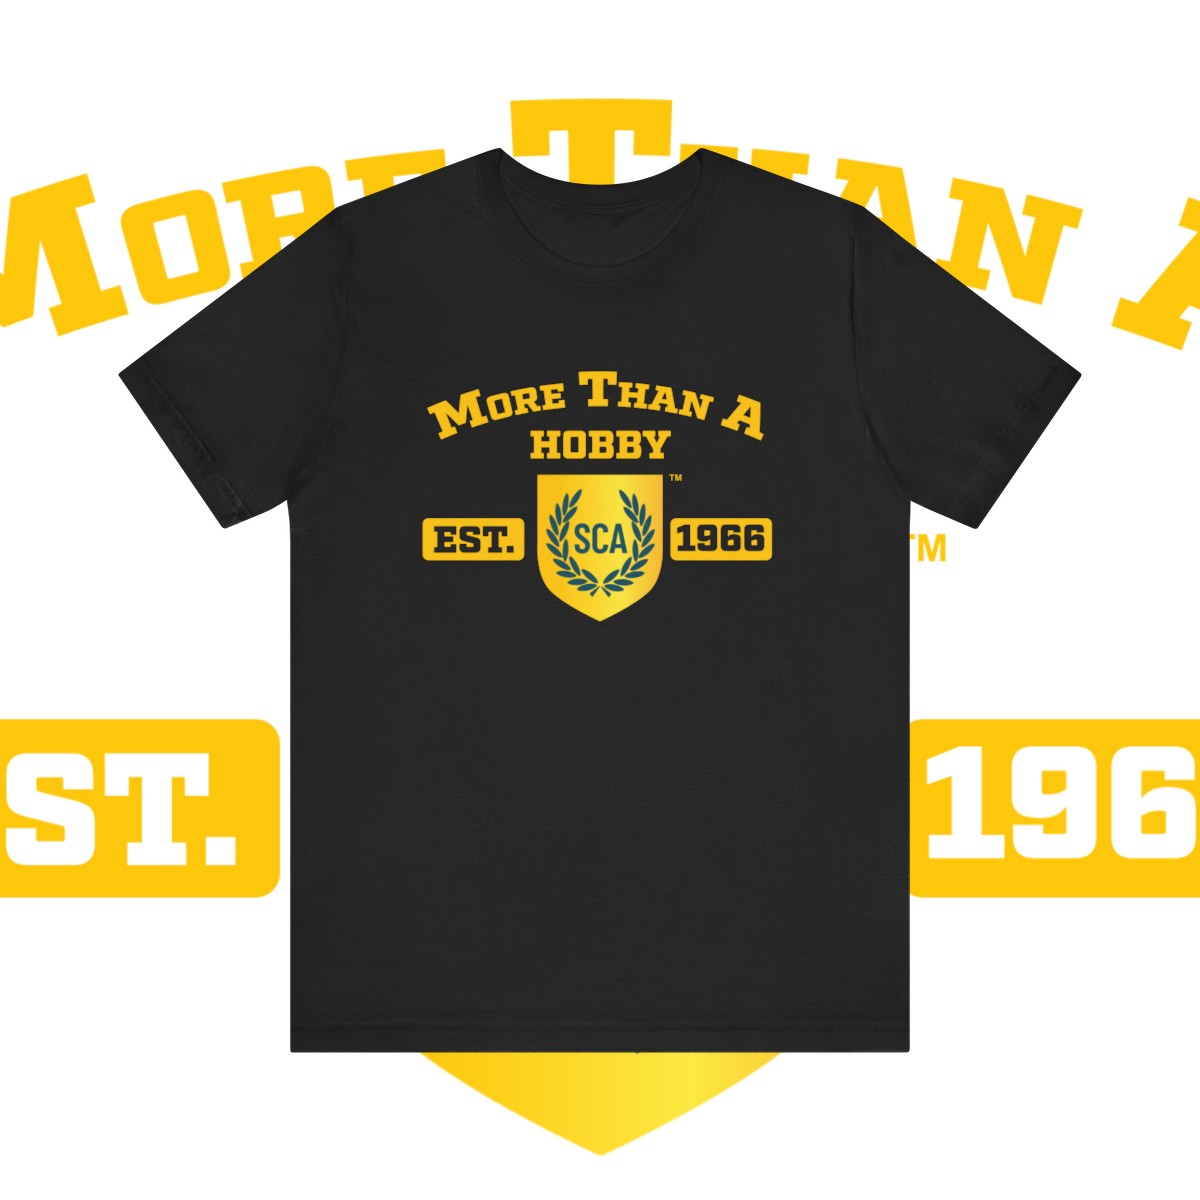 More Than a Hobby SCA Tee product thumbnail image